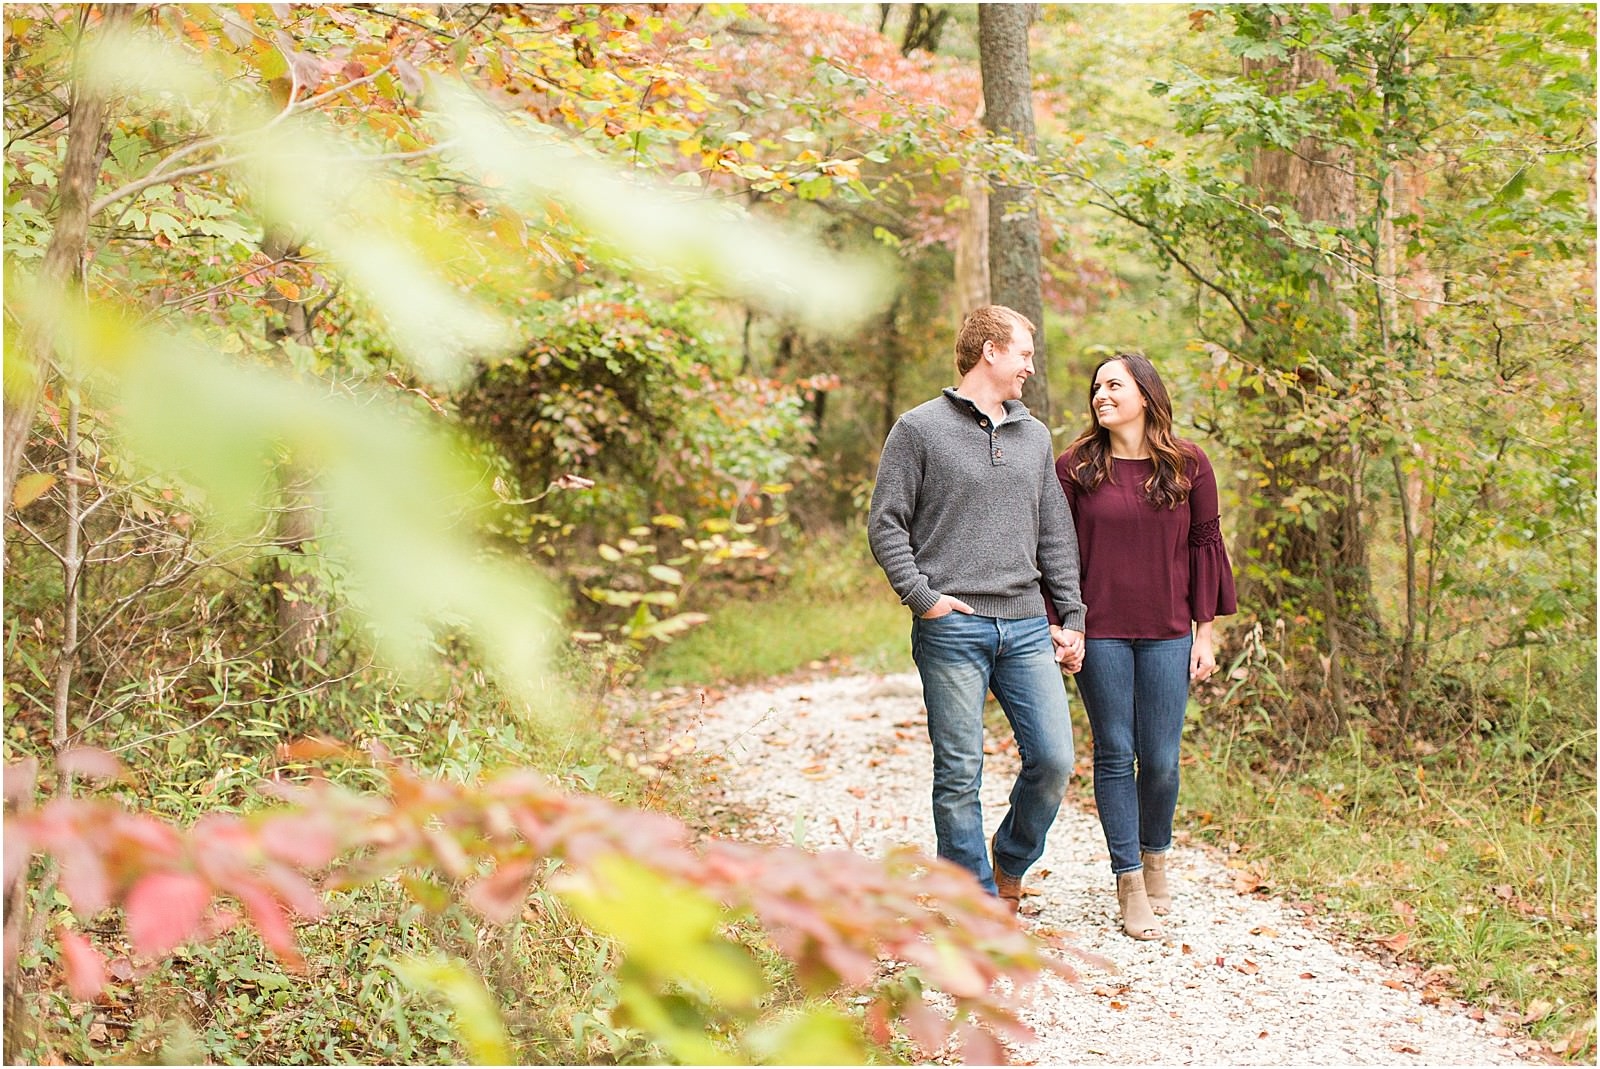 A Lincoln State Park Engagemtent Session | Deidra and Andrew | Bret and Brandie Photography 0018.jpg